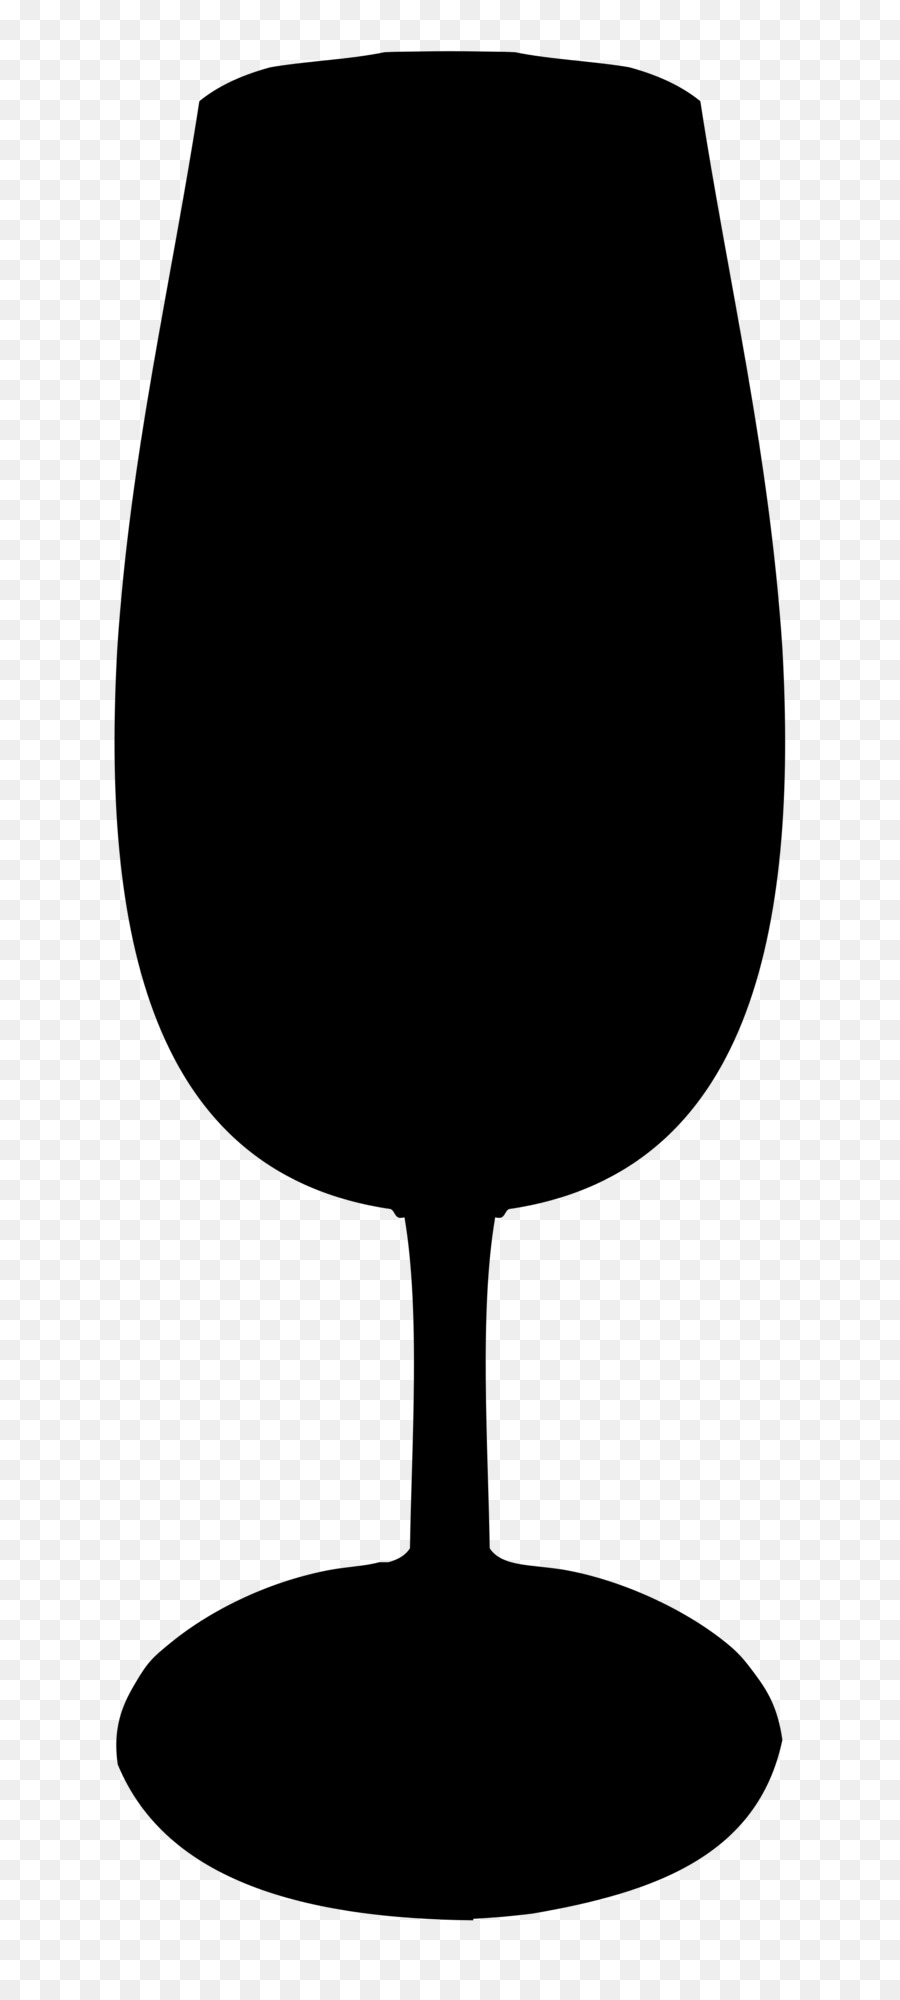 Featured image of post Silhouette Champagne Glasses Clipart Free cliparts that you can download to you computer and use in your designs